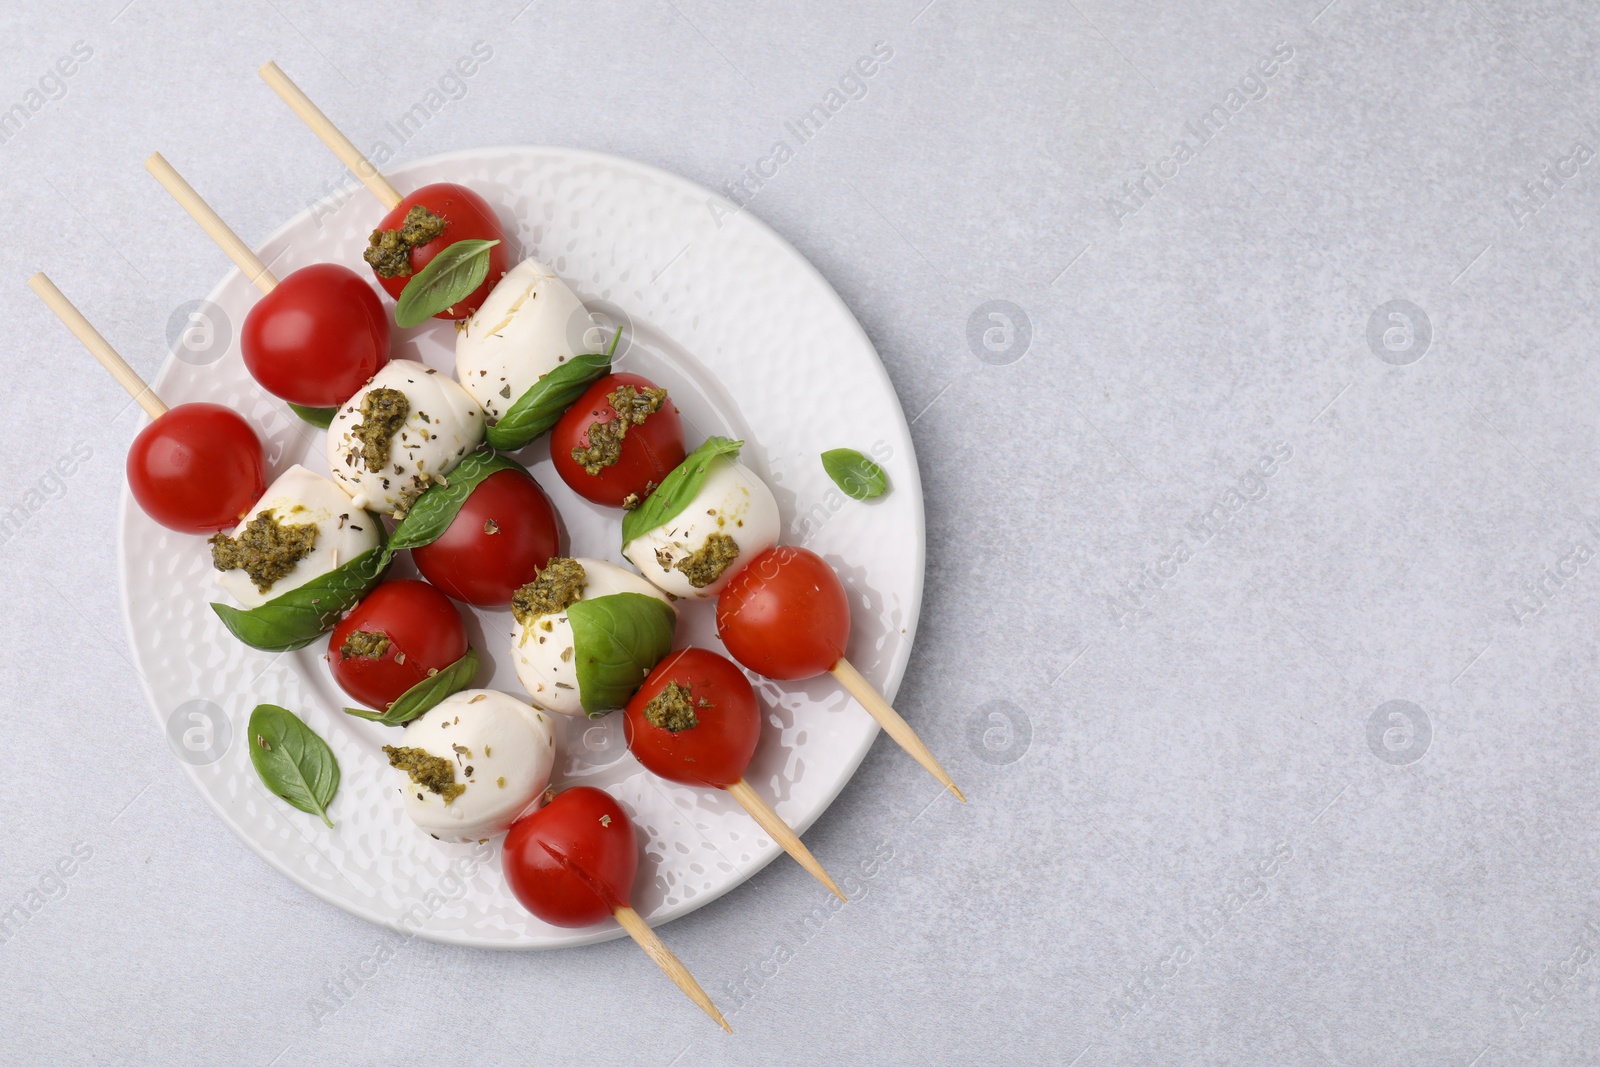 Photo of Caprese skewers with tomatoes, mozzarella balls, basil and pesto sauce on white table, top view. Space for text